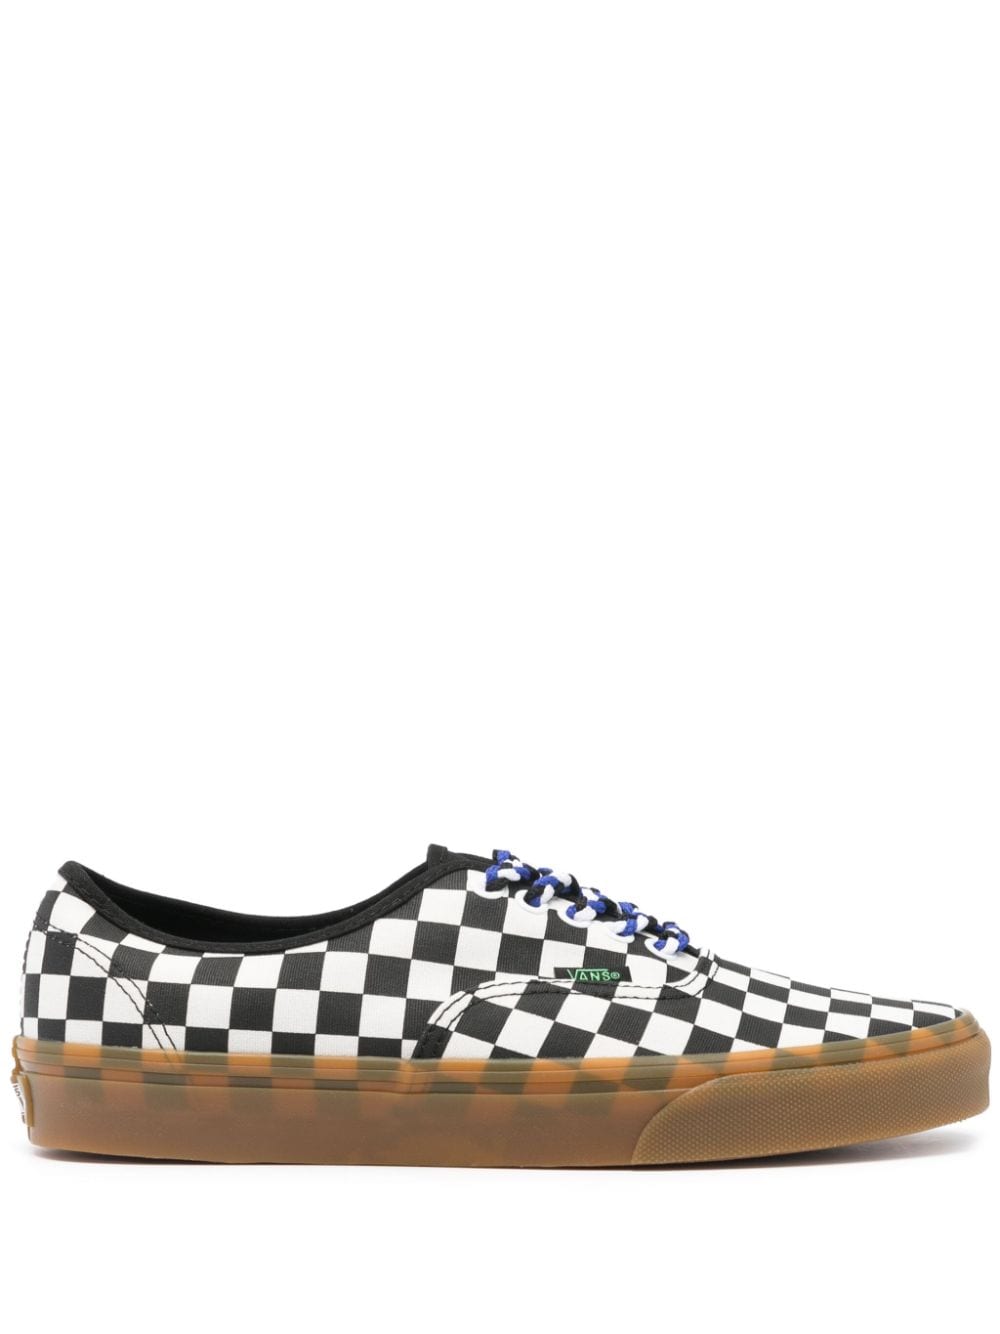 Image 1 of Vans Authentic checkerboard sneakers